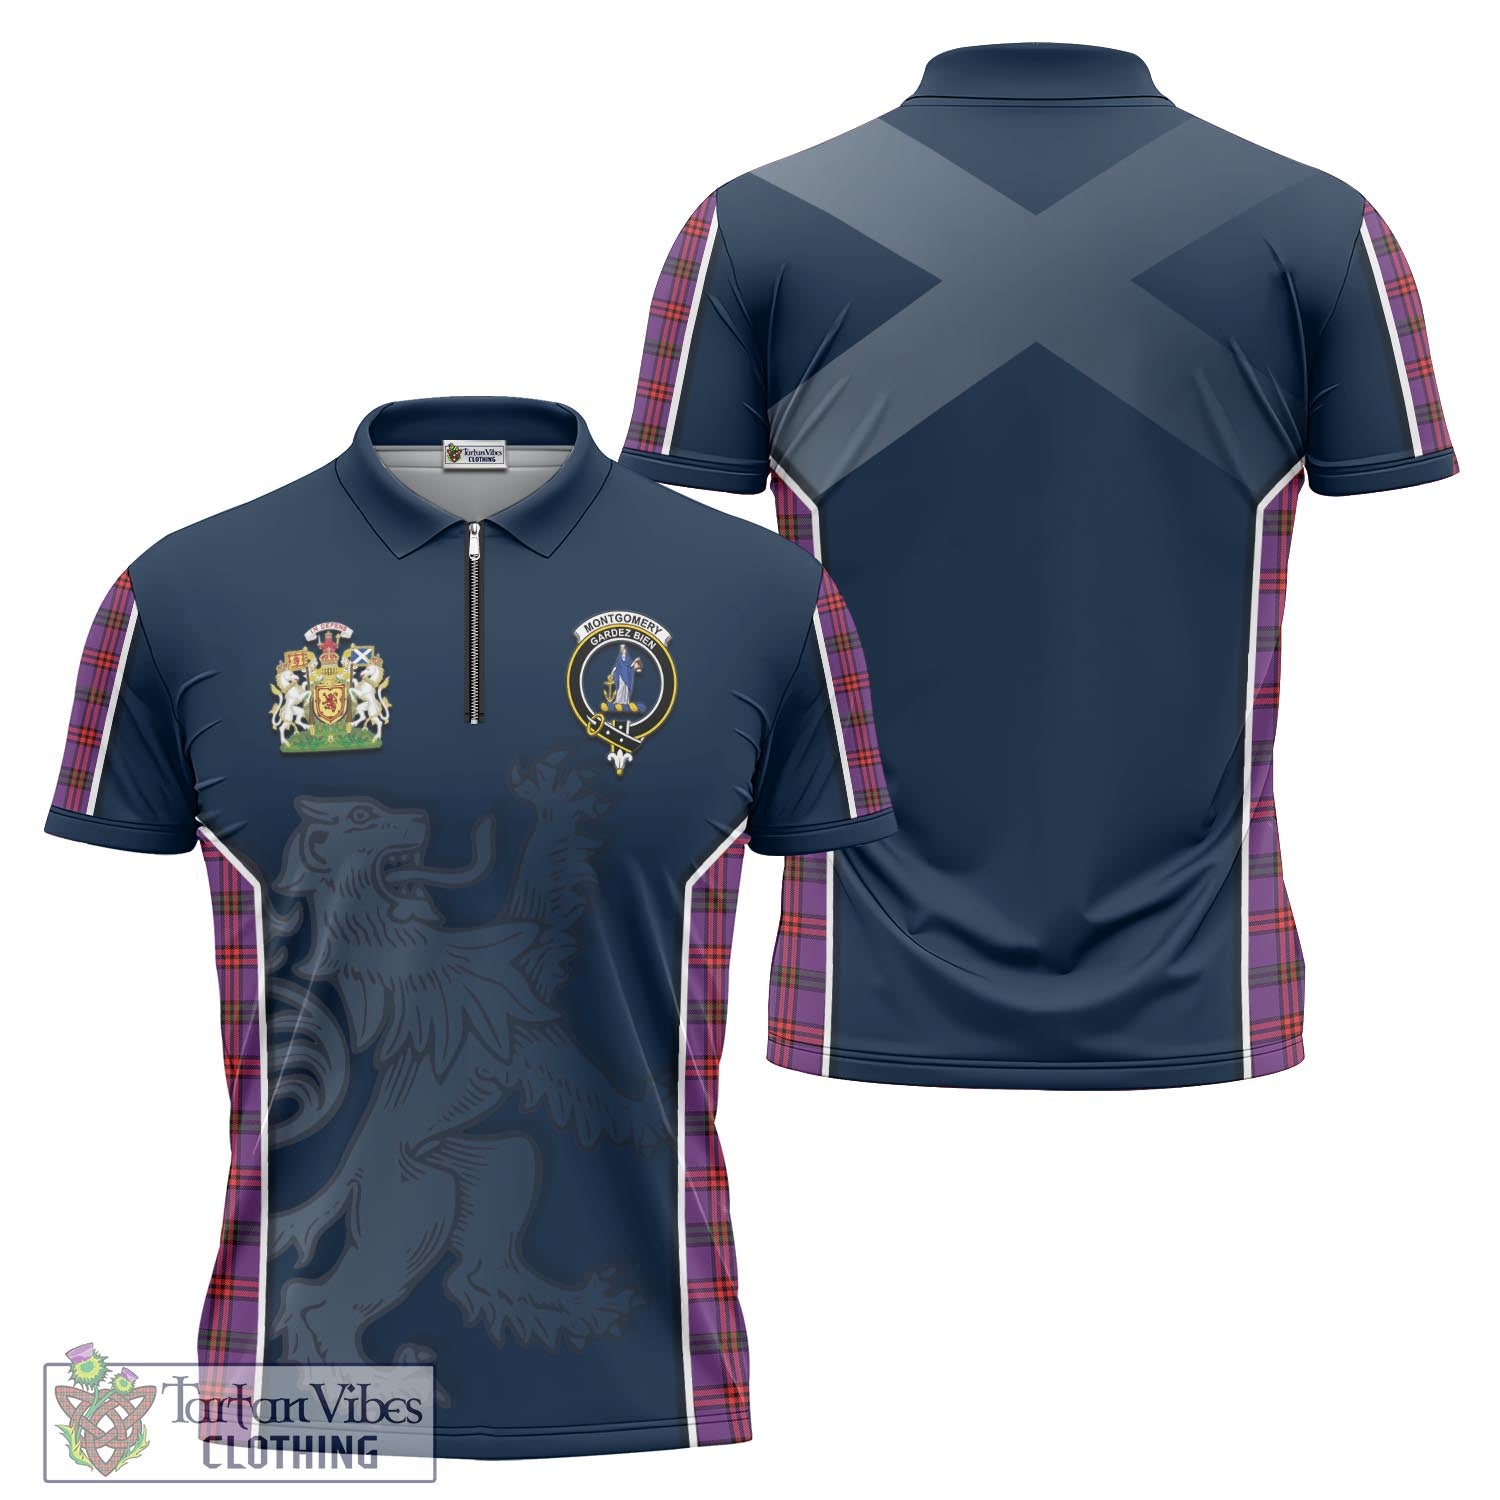 Tartan Vibes Clothing Montgomery Modern Tartan Zipper Polo Shirt with Family Crest and Lion Rampant Vibes Sport Style